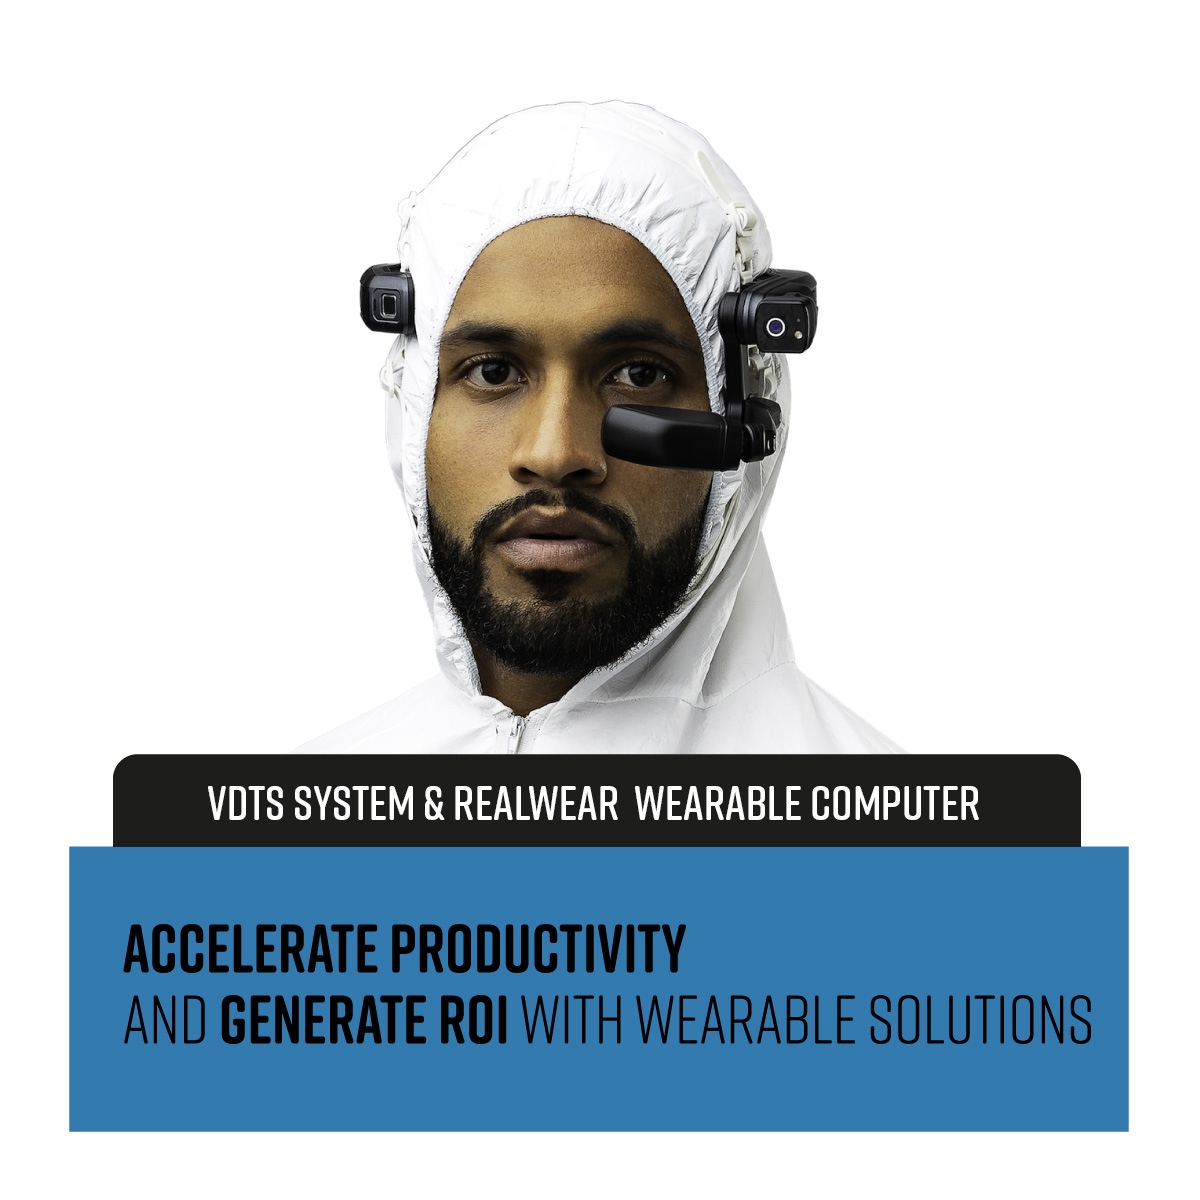 Accelerate productivity and generate ROI with wearable solutions from VDTS. Learn More: bit.ly/3RLnLen #Freeyourhands #datacollection #handsfree #voicetechnology #wireless #connected #connectedworker #wearabletechnology